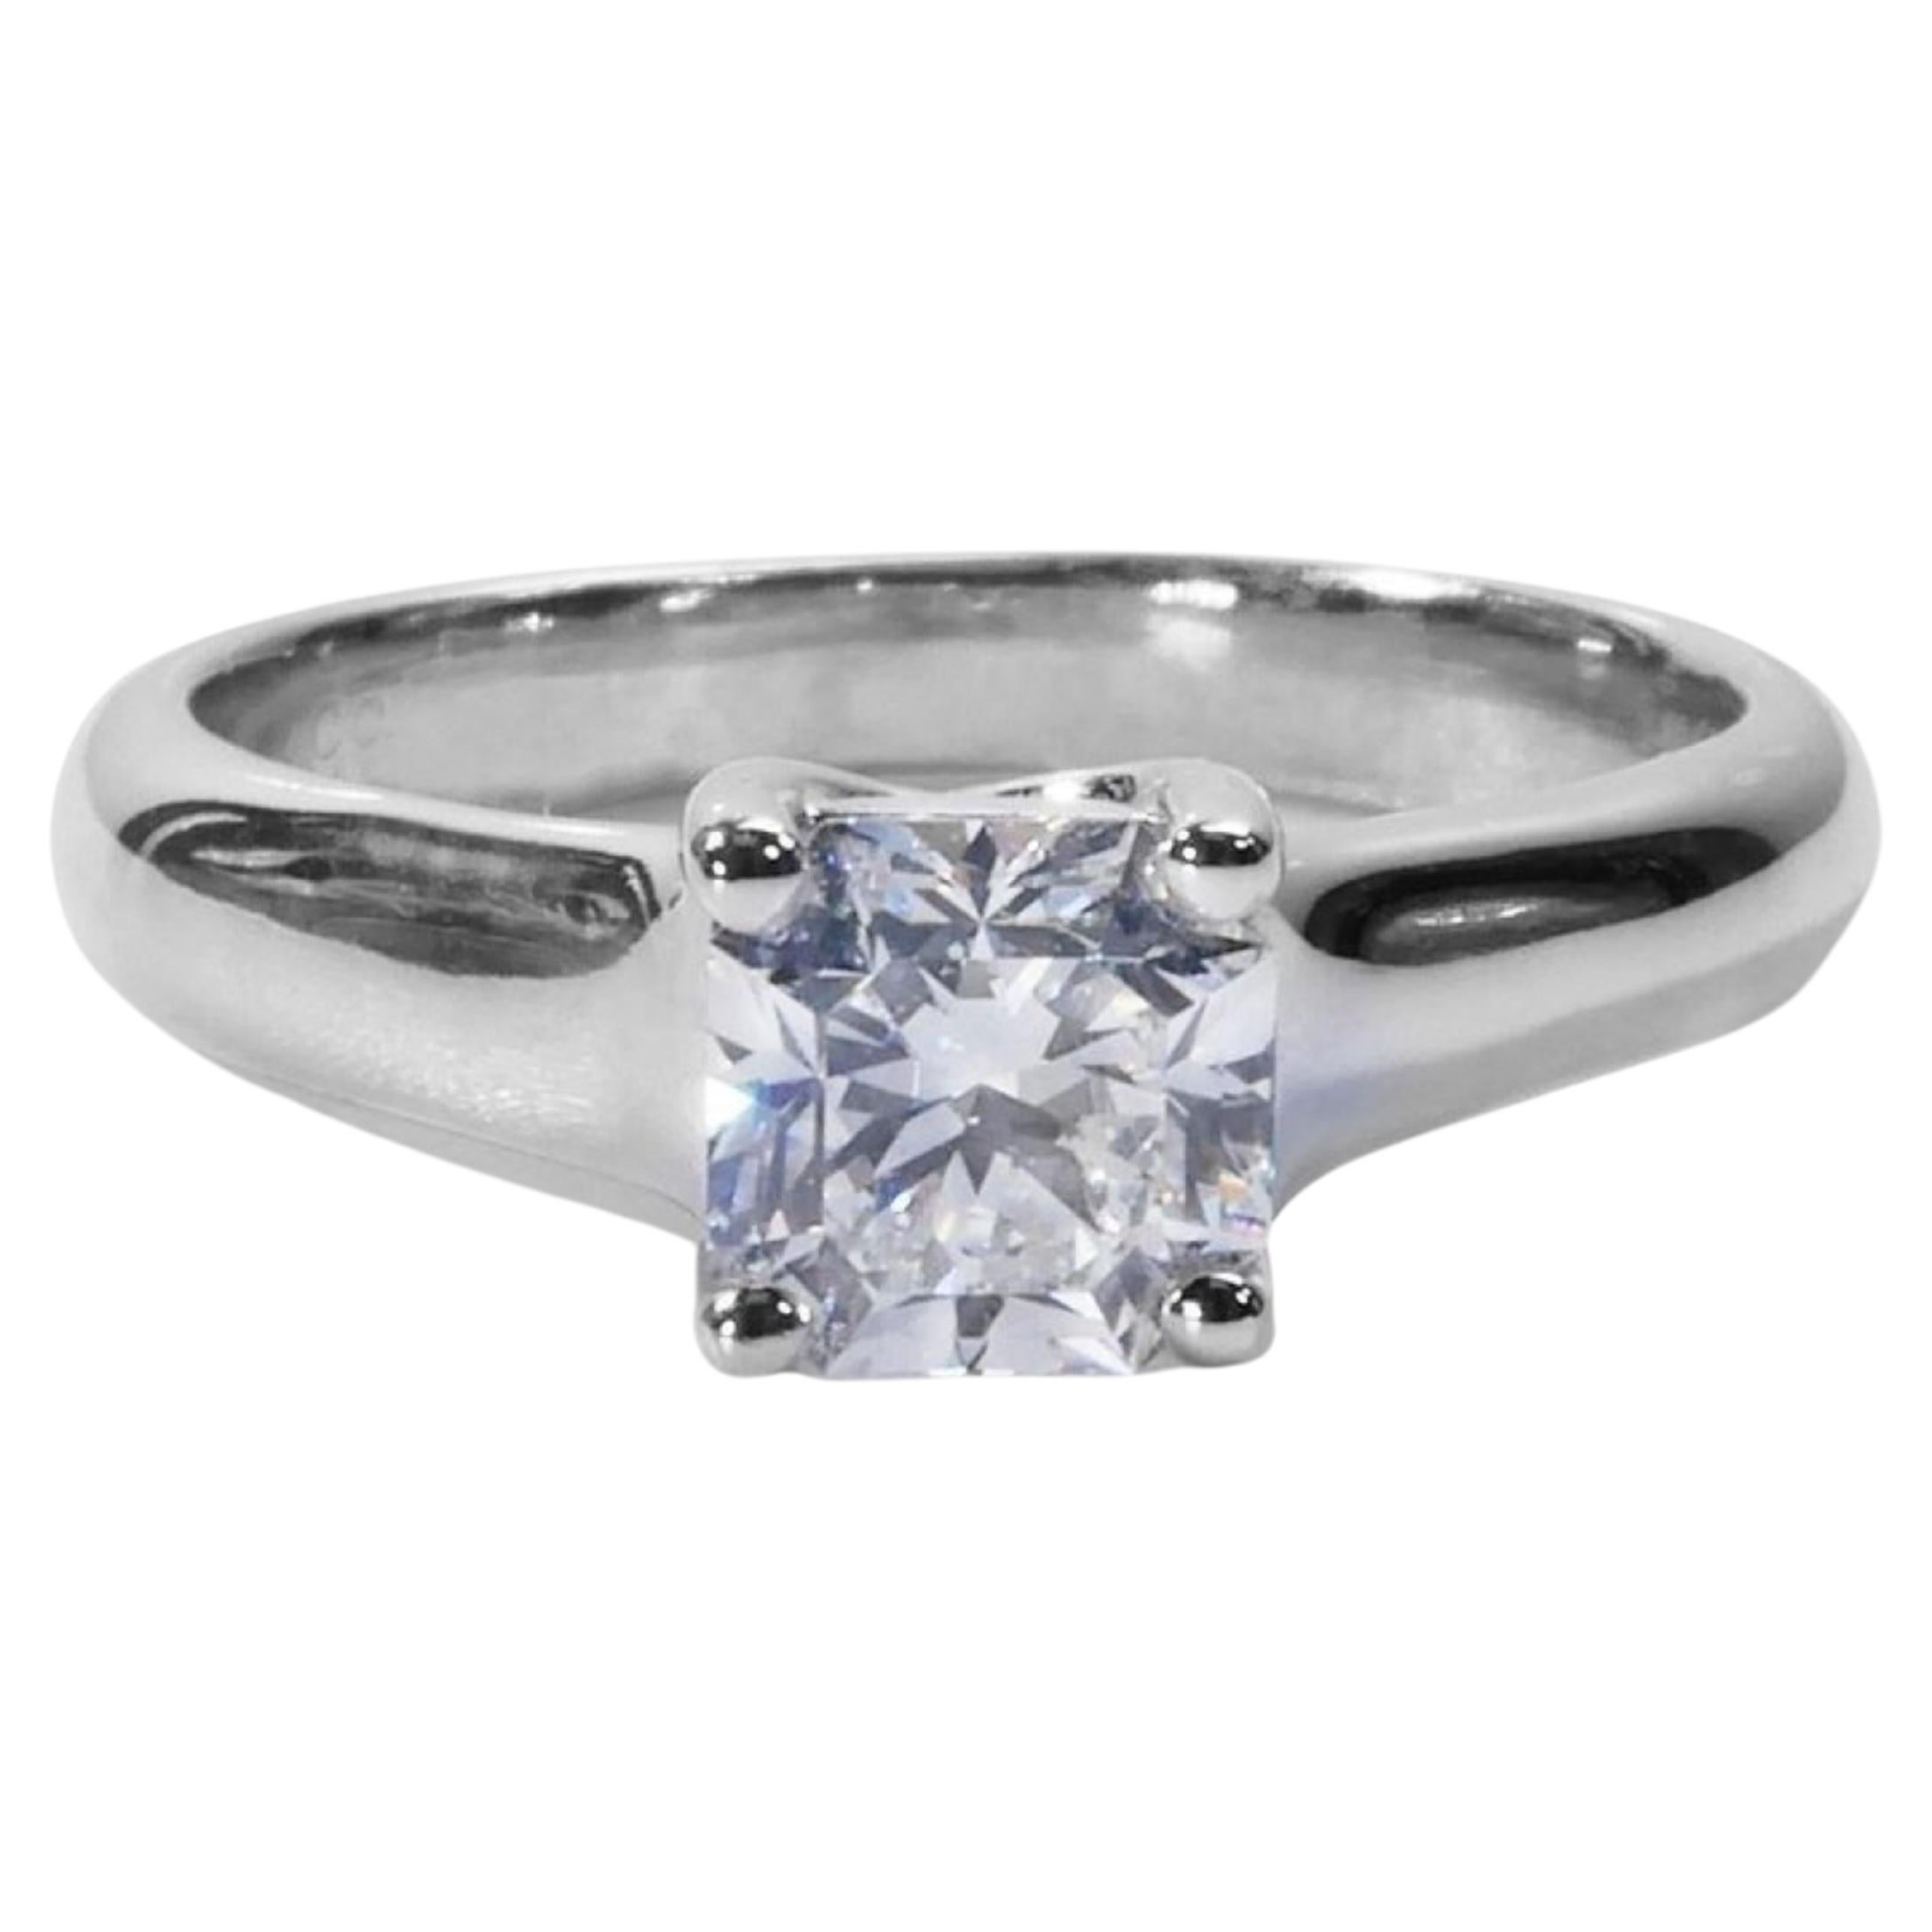 Stunning Solitaire Platinum Ring with 0.80 total carat of Natural Diamond For Sale